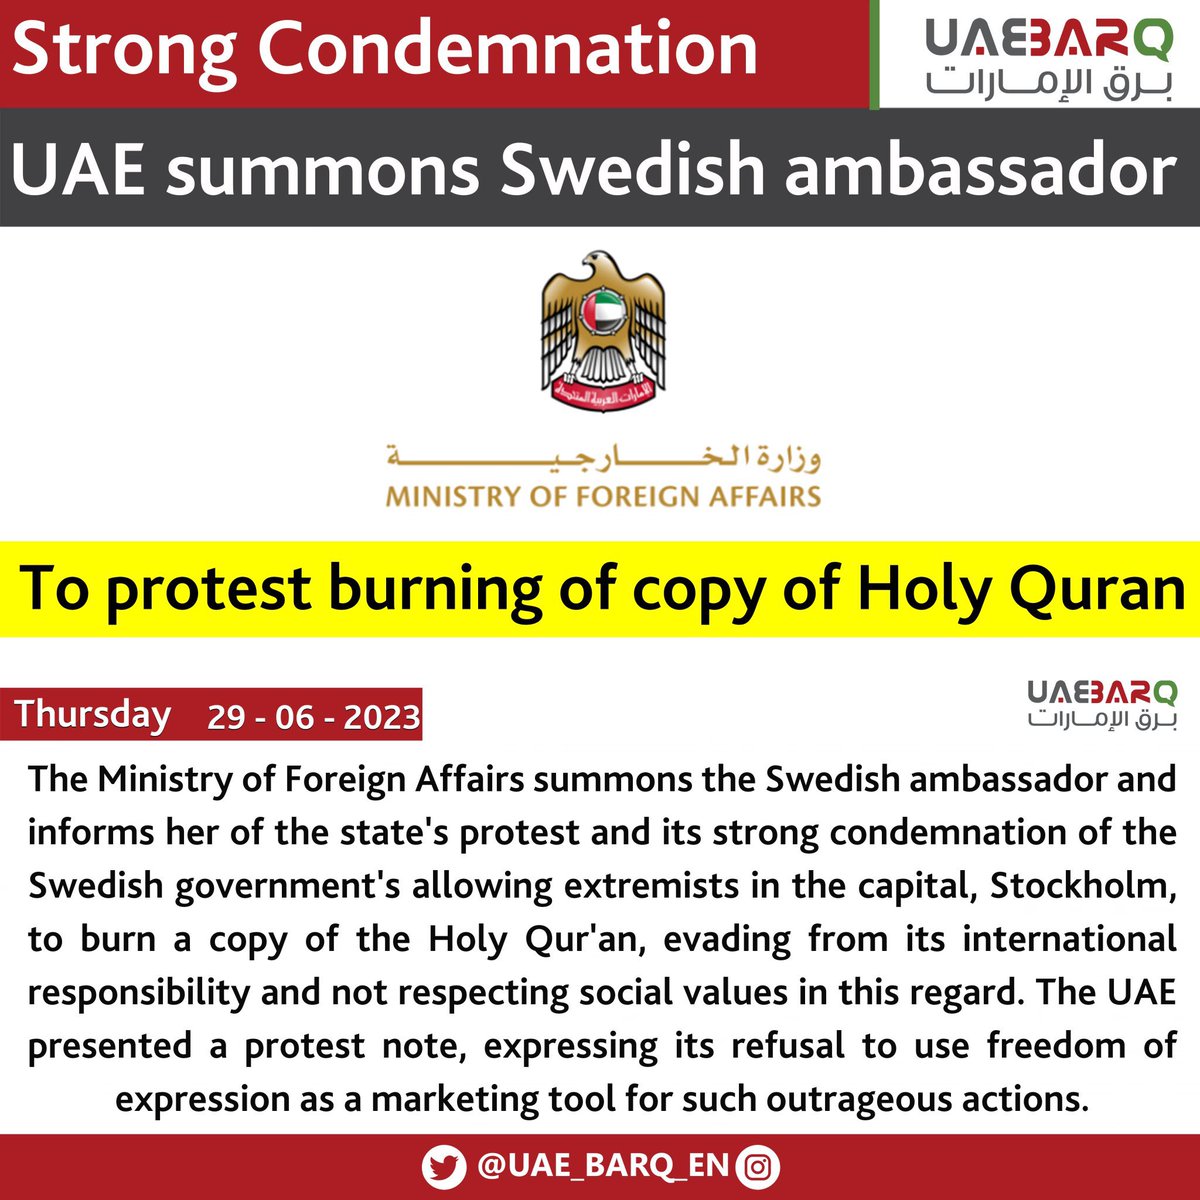 Burning the Quran is a sign of hate, extremism and terrorism of speech. Got nothing to do with “freedom of speech”.

I hope all Muslim countries unite to put an end to these constant insults to our sacred religion.